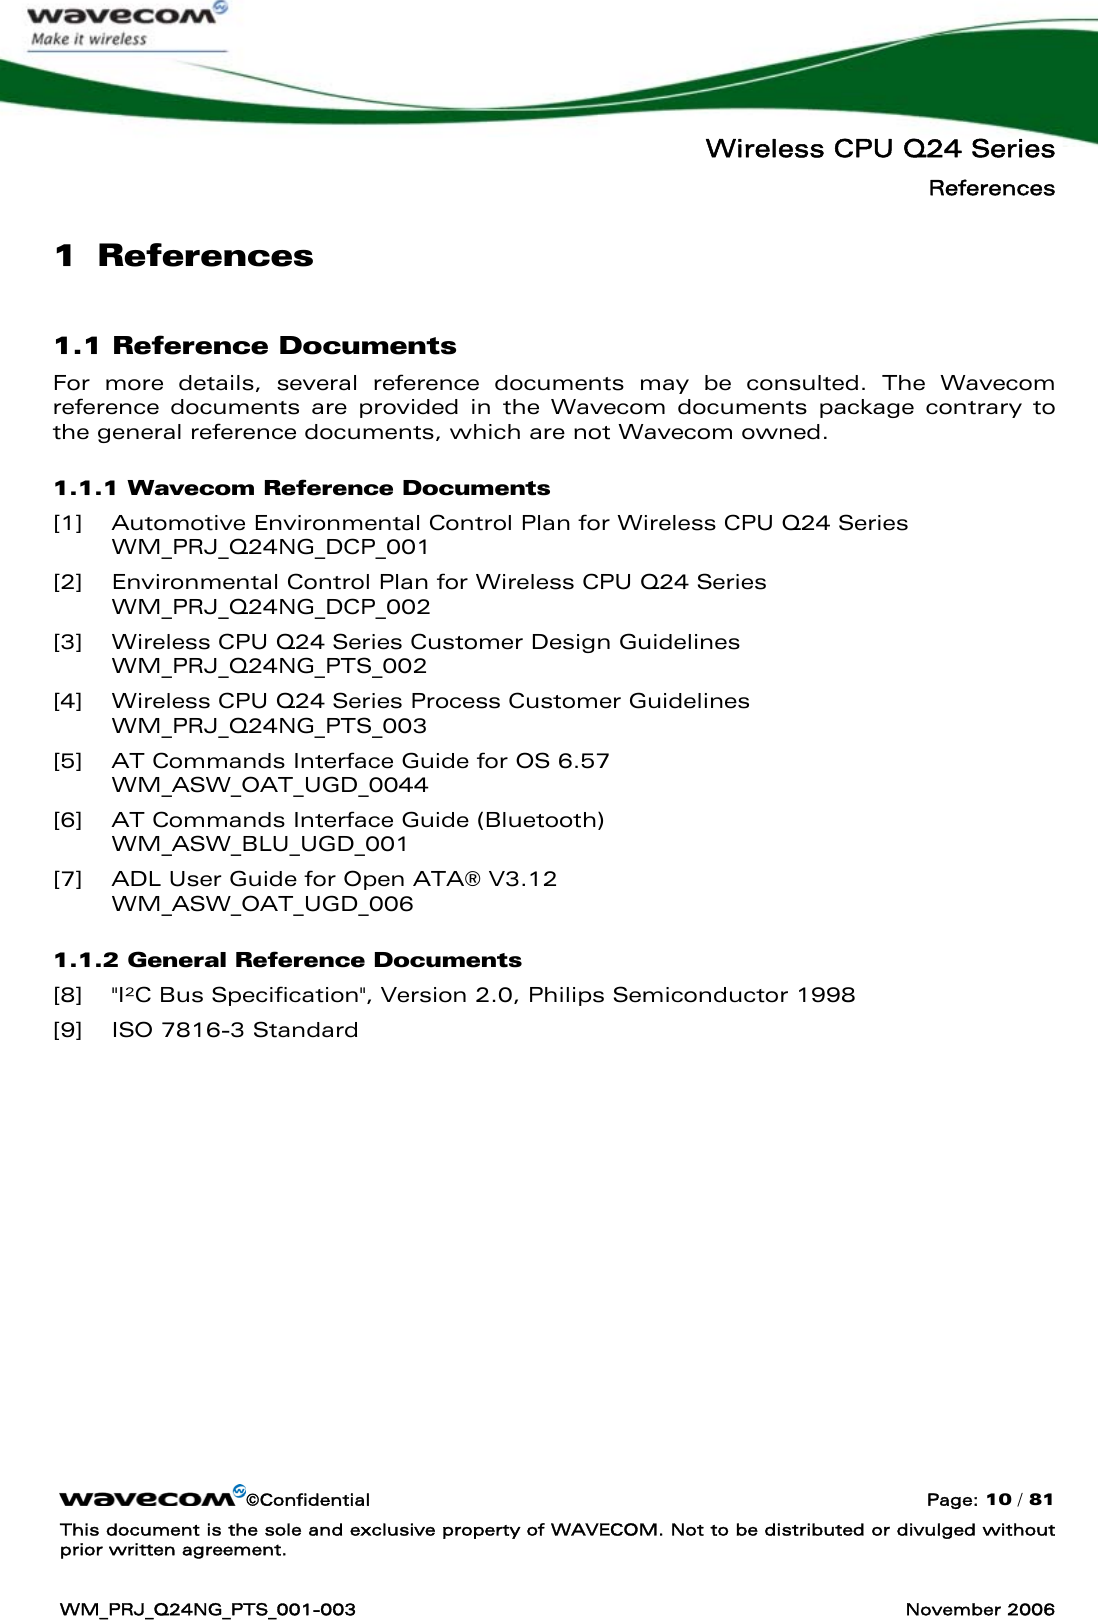   Wireless CPU Q24 Series References ©Confidential  Page: 10 / 81 This document is the sole and exclusive property of WAVECOM. Not to be distributed or divulged without prior written agreement.  WM_PRJ_Q24NG_PTS_001-003  November 2006  1 References 1.1 Reference Documents For more details, several reference documents may be consulted. The Wavecom reference documents are provided in the Wavecom documents package contrary to the general reference documents, which are not Wavecom owned. 1.1.1 Wavecom Reference Documents [1] Automotive Environmental Control Plan for Wireless CPU Q24 Series  WM_PRJ_Q24NG_DCP_001 [2] Environmental Control Plan for Wireless CPU Q24 Series  WM_PRJ_Q24NG_DCP_002 [3] Wireless CPU Q24 Series Customer Design Guidelines WM_PRJ_Q24NG_PTS_002 [4] Wireless CPU Q24 Series Process Customer Guidelines WM_PRJ_Q24NG_PTS_003 [5] AT Commands Interface Guide for OS 6.57 WM_ASW_OAT_UGD_0044 [6] AT Commands Interface Guide (Bluetooth) WM_ASW_BLU_UGD_001 [7] ADL User Guide for Open ATA® V3.12 WM_ASW_OAT_UGD_006 1.1.2 General Reference Documents [8] &quot;I²C Bus Specification&quot;, Version 2.0, Philips Semiconductor 1998 [9] ISO 7816-3 Standard 